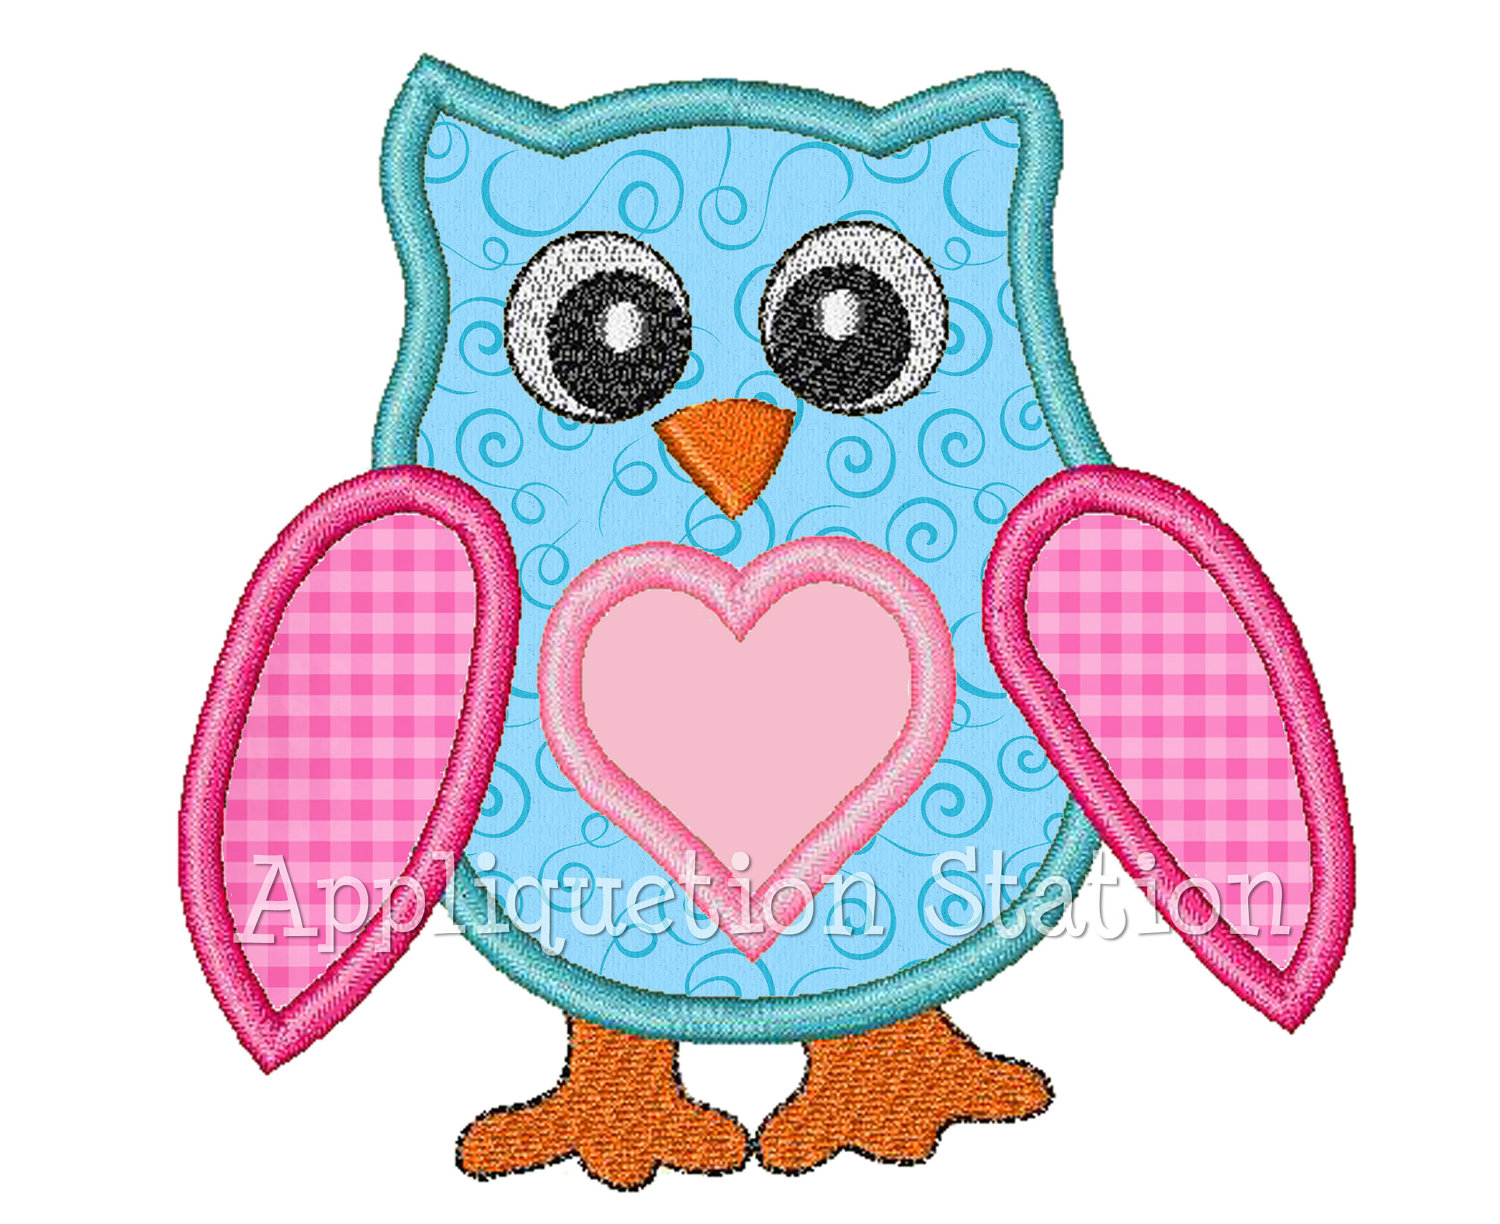 Machine Embroidery Patterns Free Download 14 Owl Embroidery Designs Free Download Images Free Owl Applique